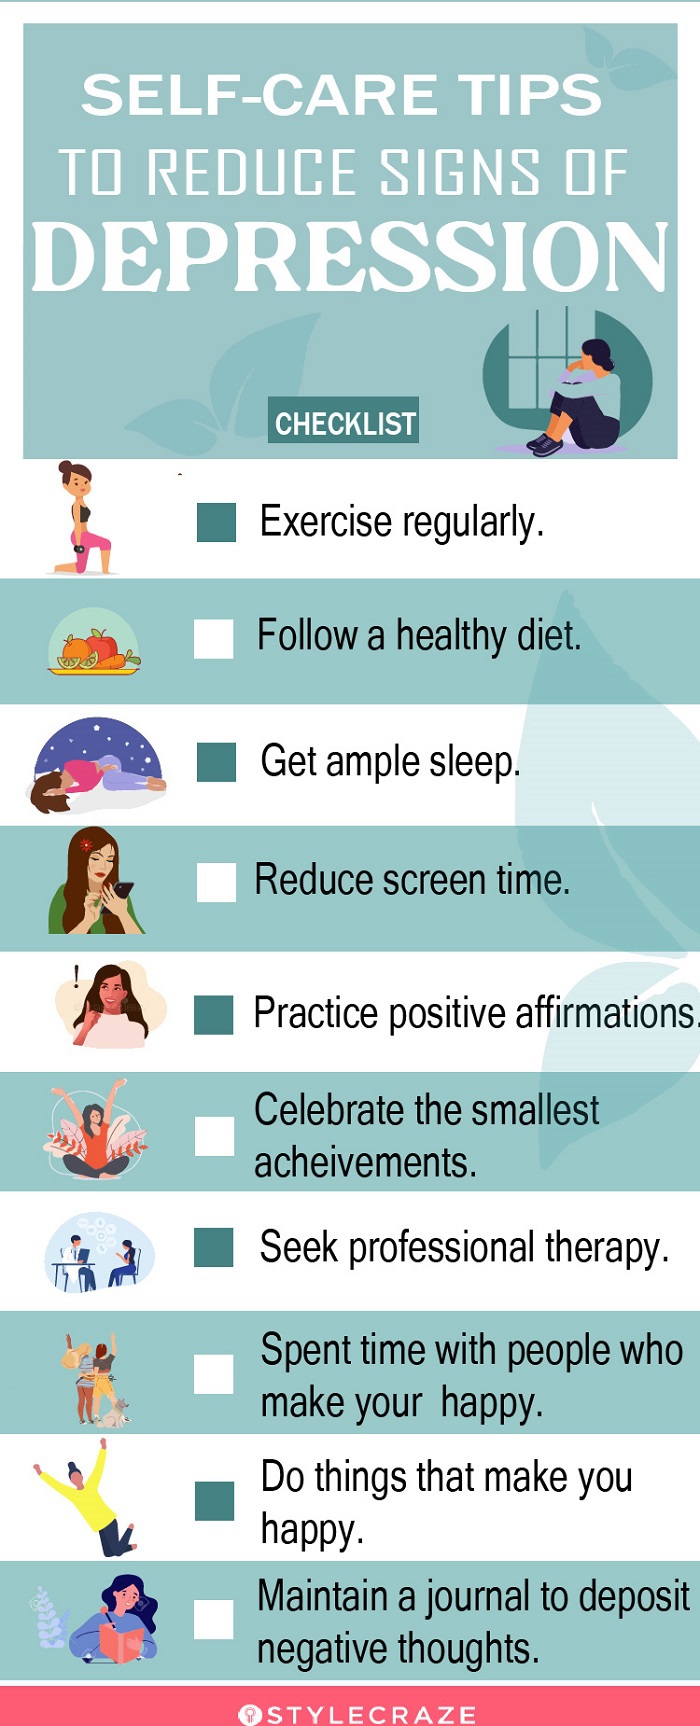 self-care tips to reduce signs of depression (infographic)